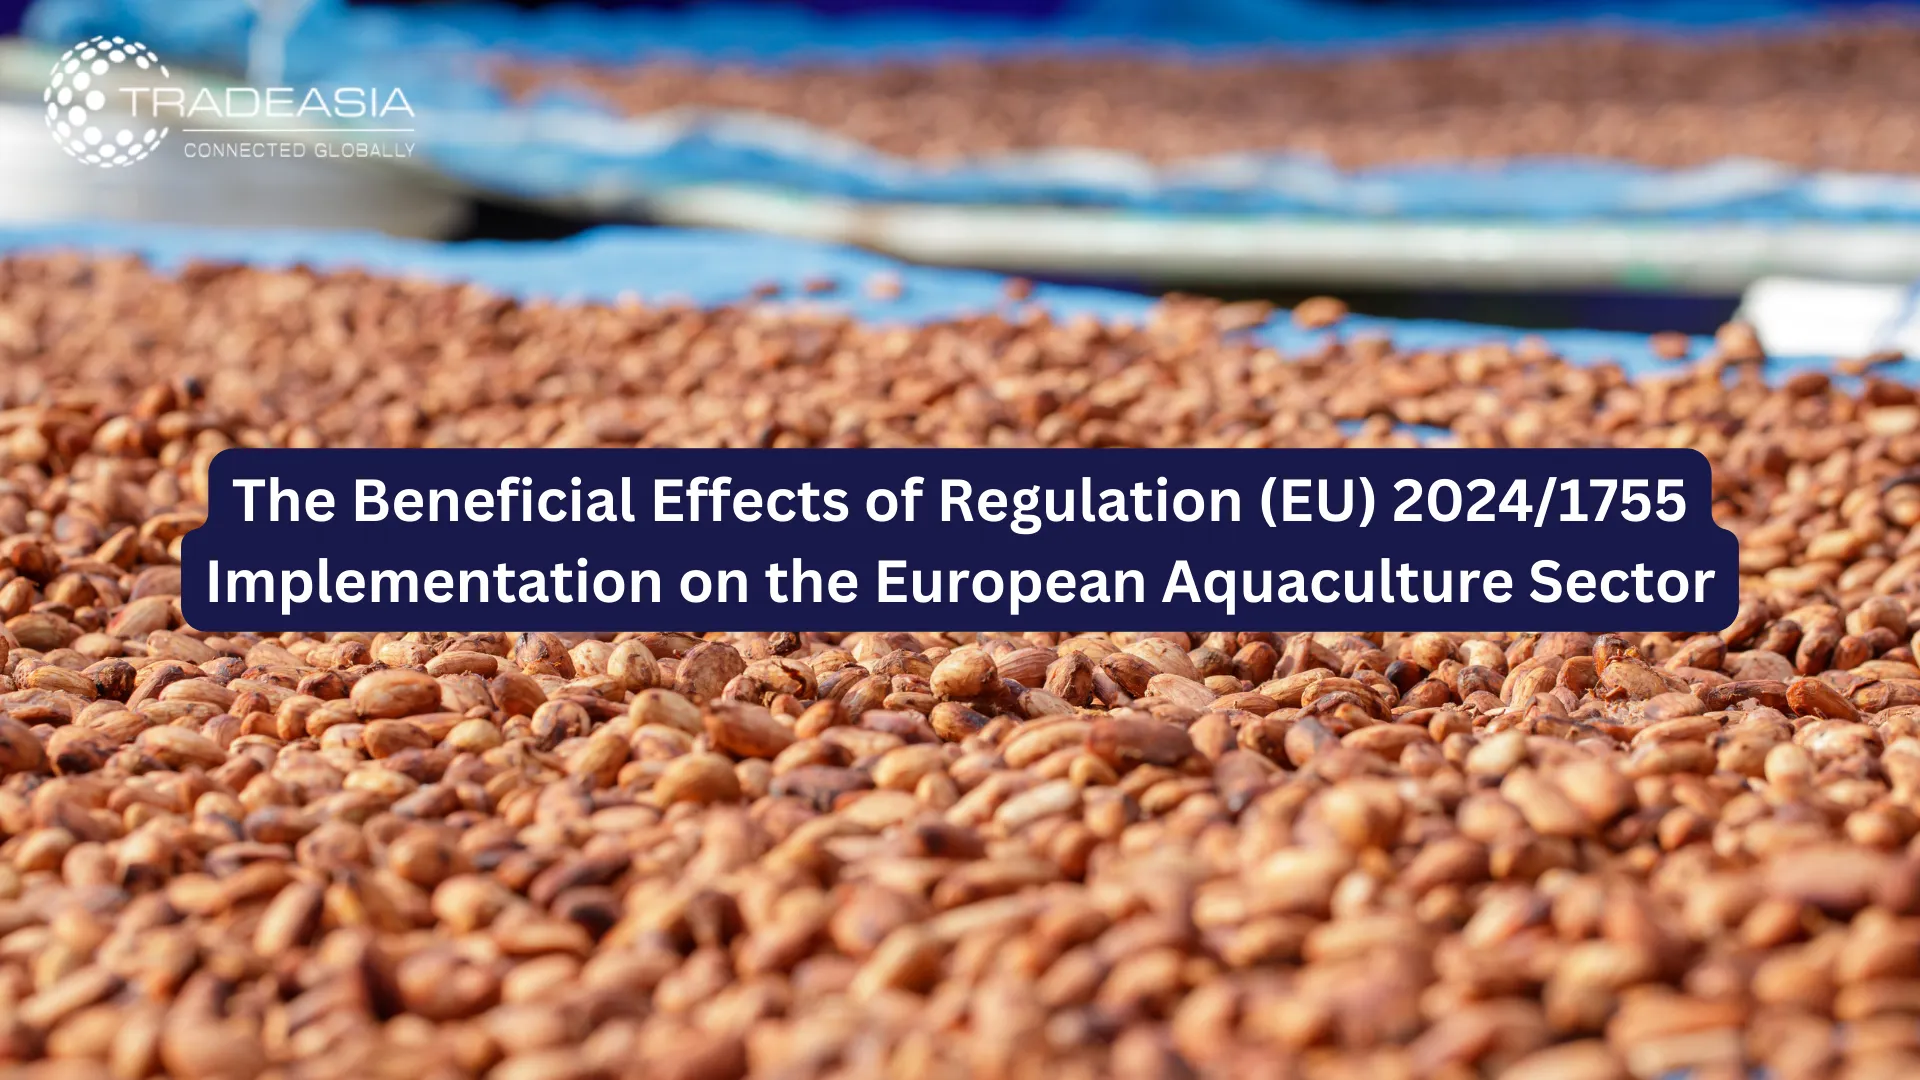 The Beneficial Effects of Regulation (EU) 2024/1755 Implementation on the European Aquaculture Industry